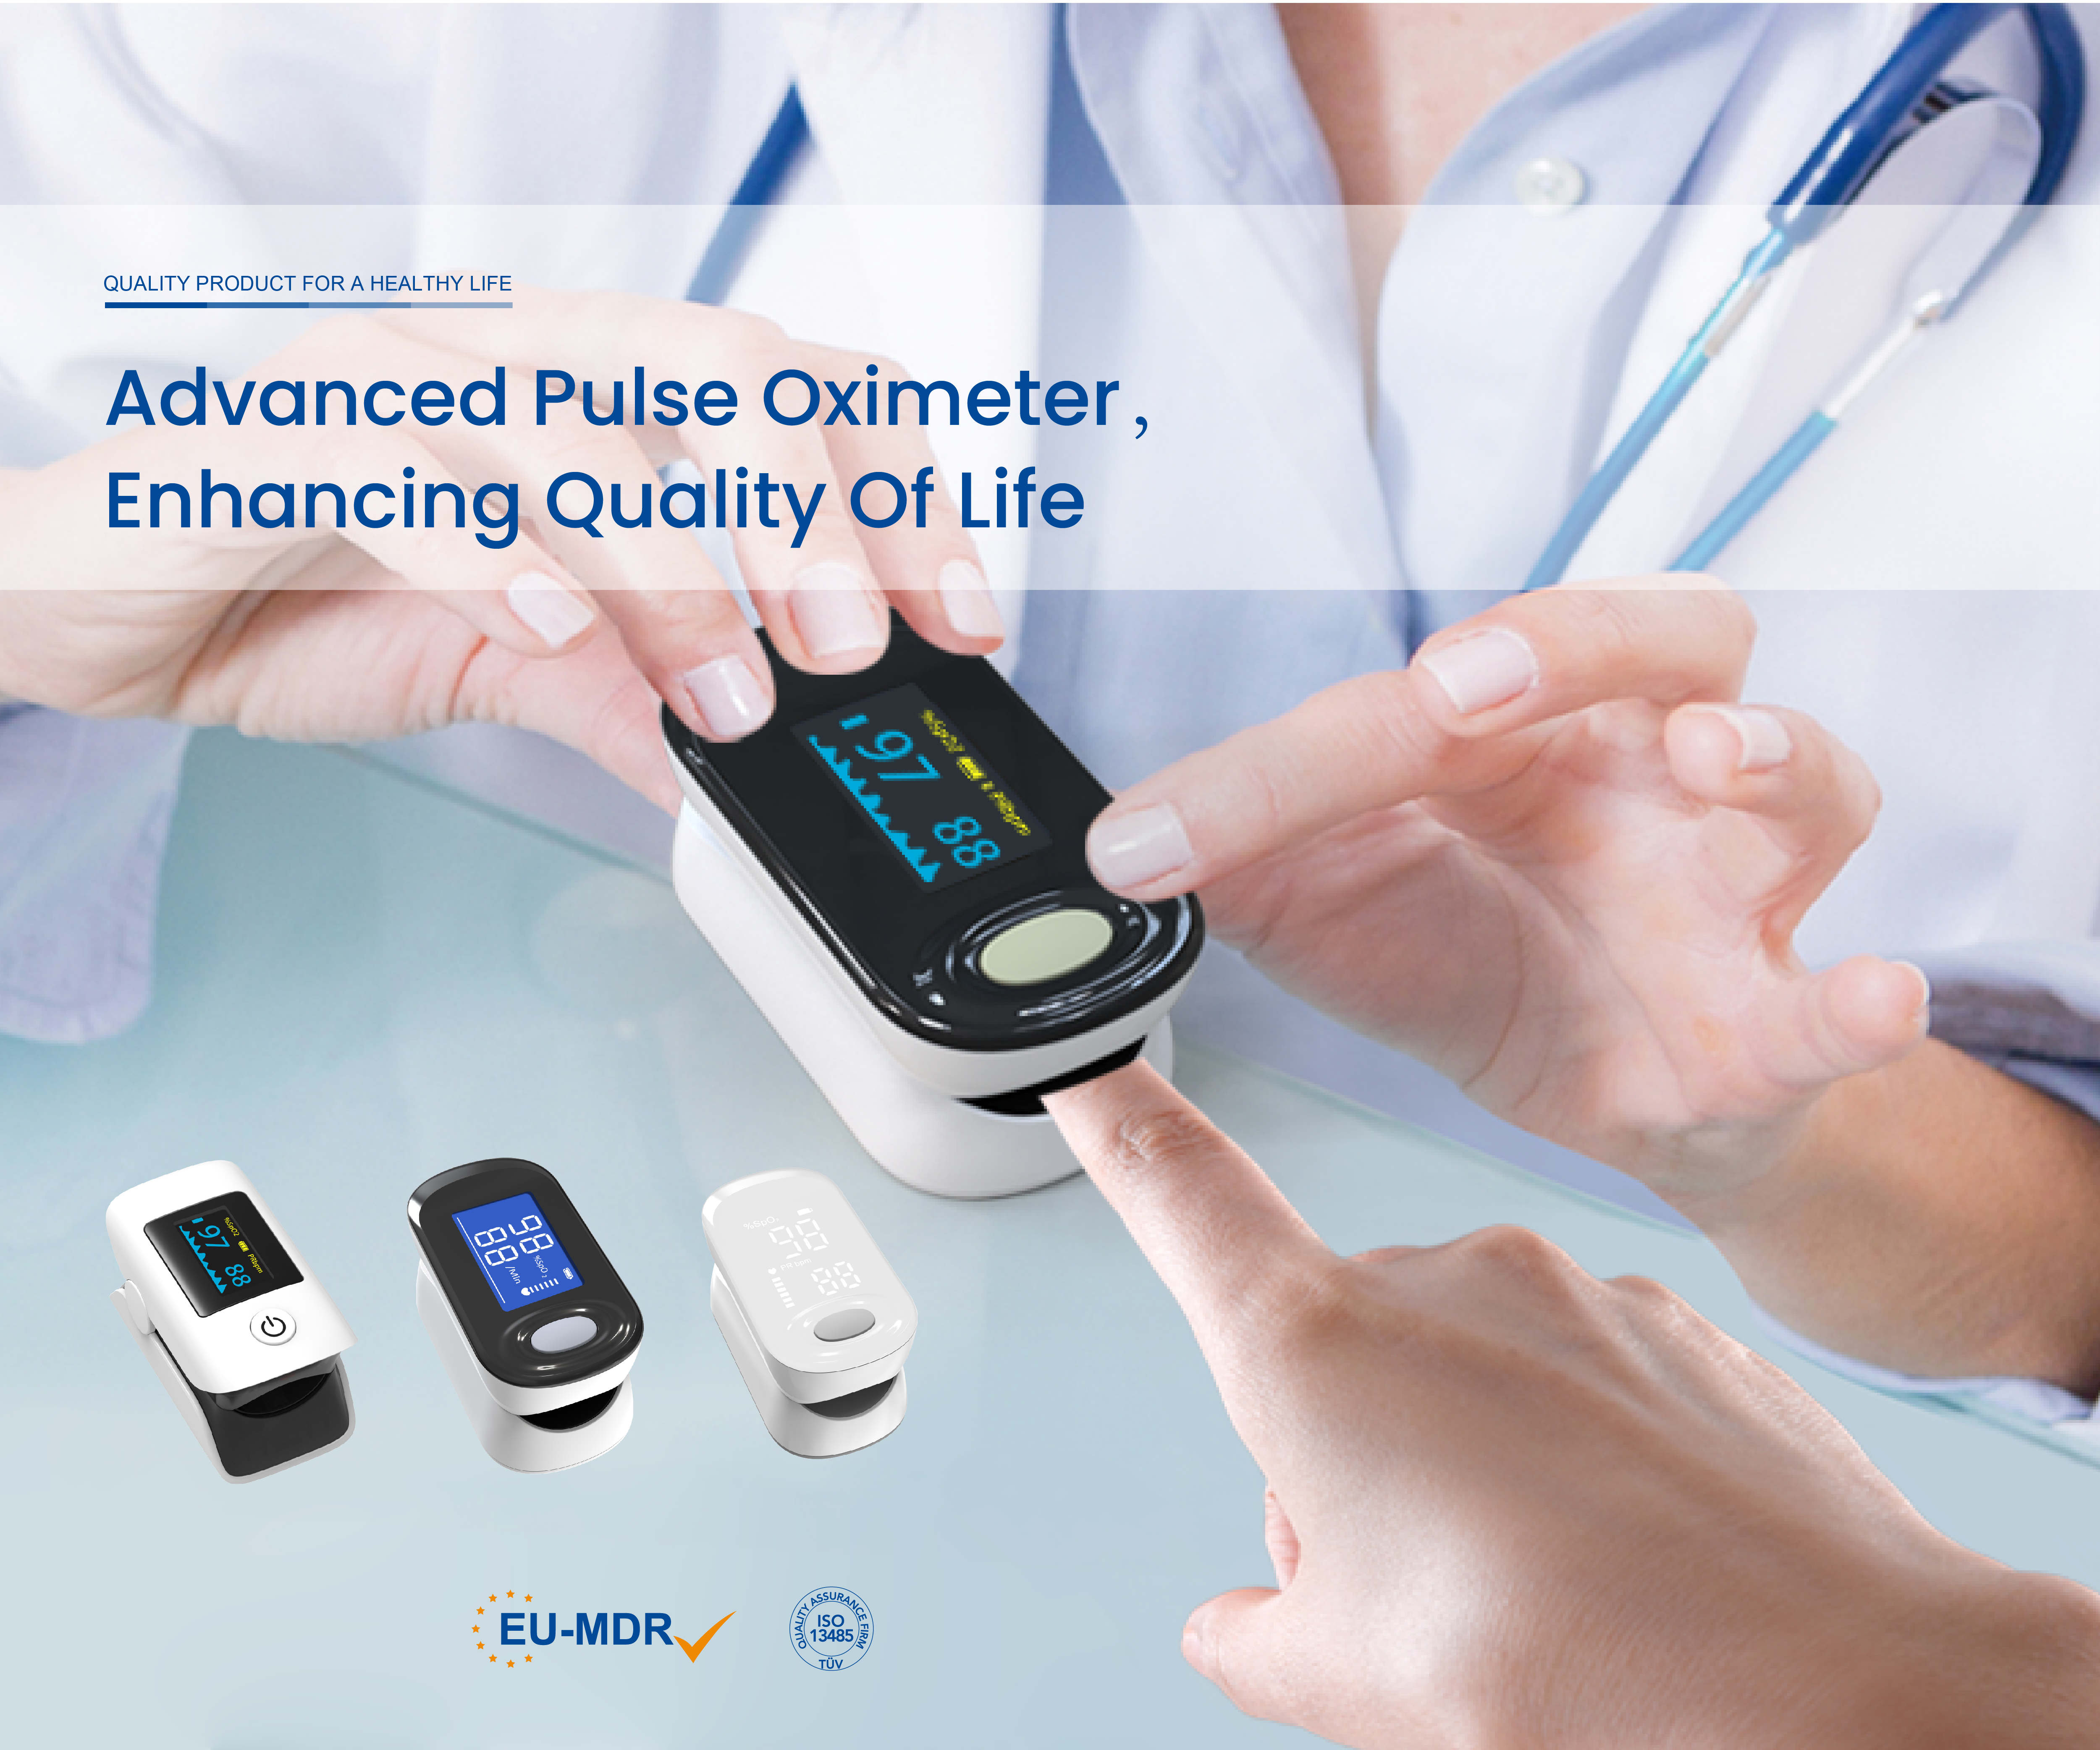 Congratulations to Joytech Healthcare on Achieving CE MDR Certification for Fingertip Pulse Oximeters!